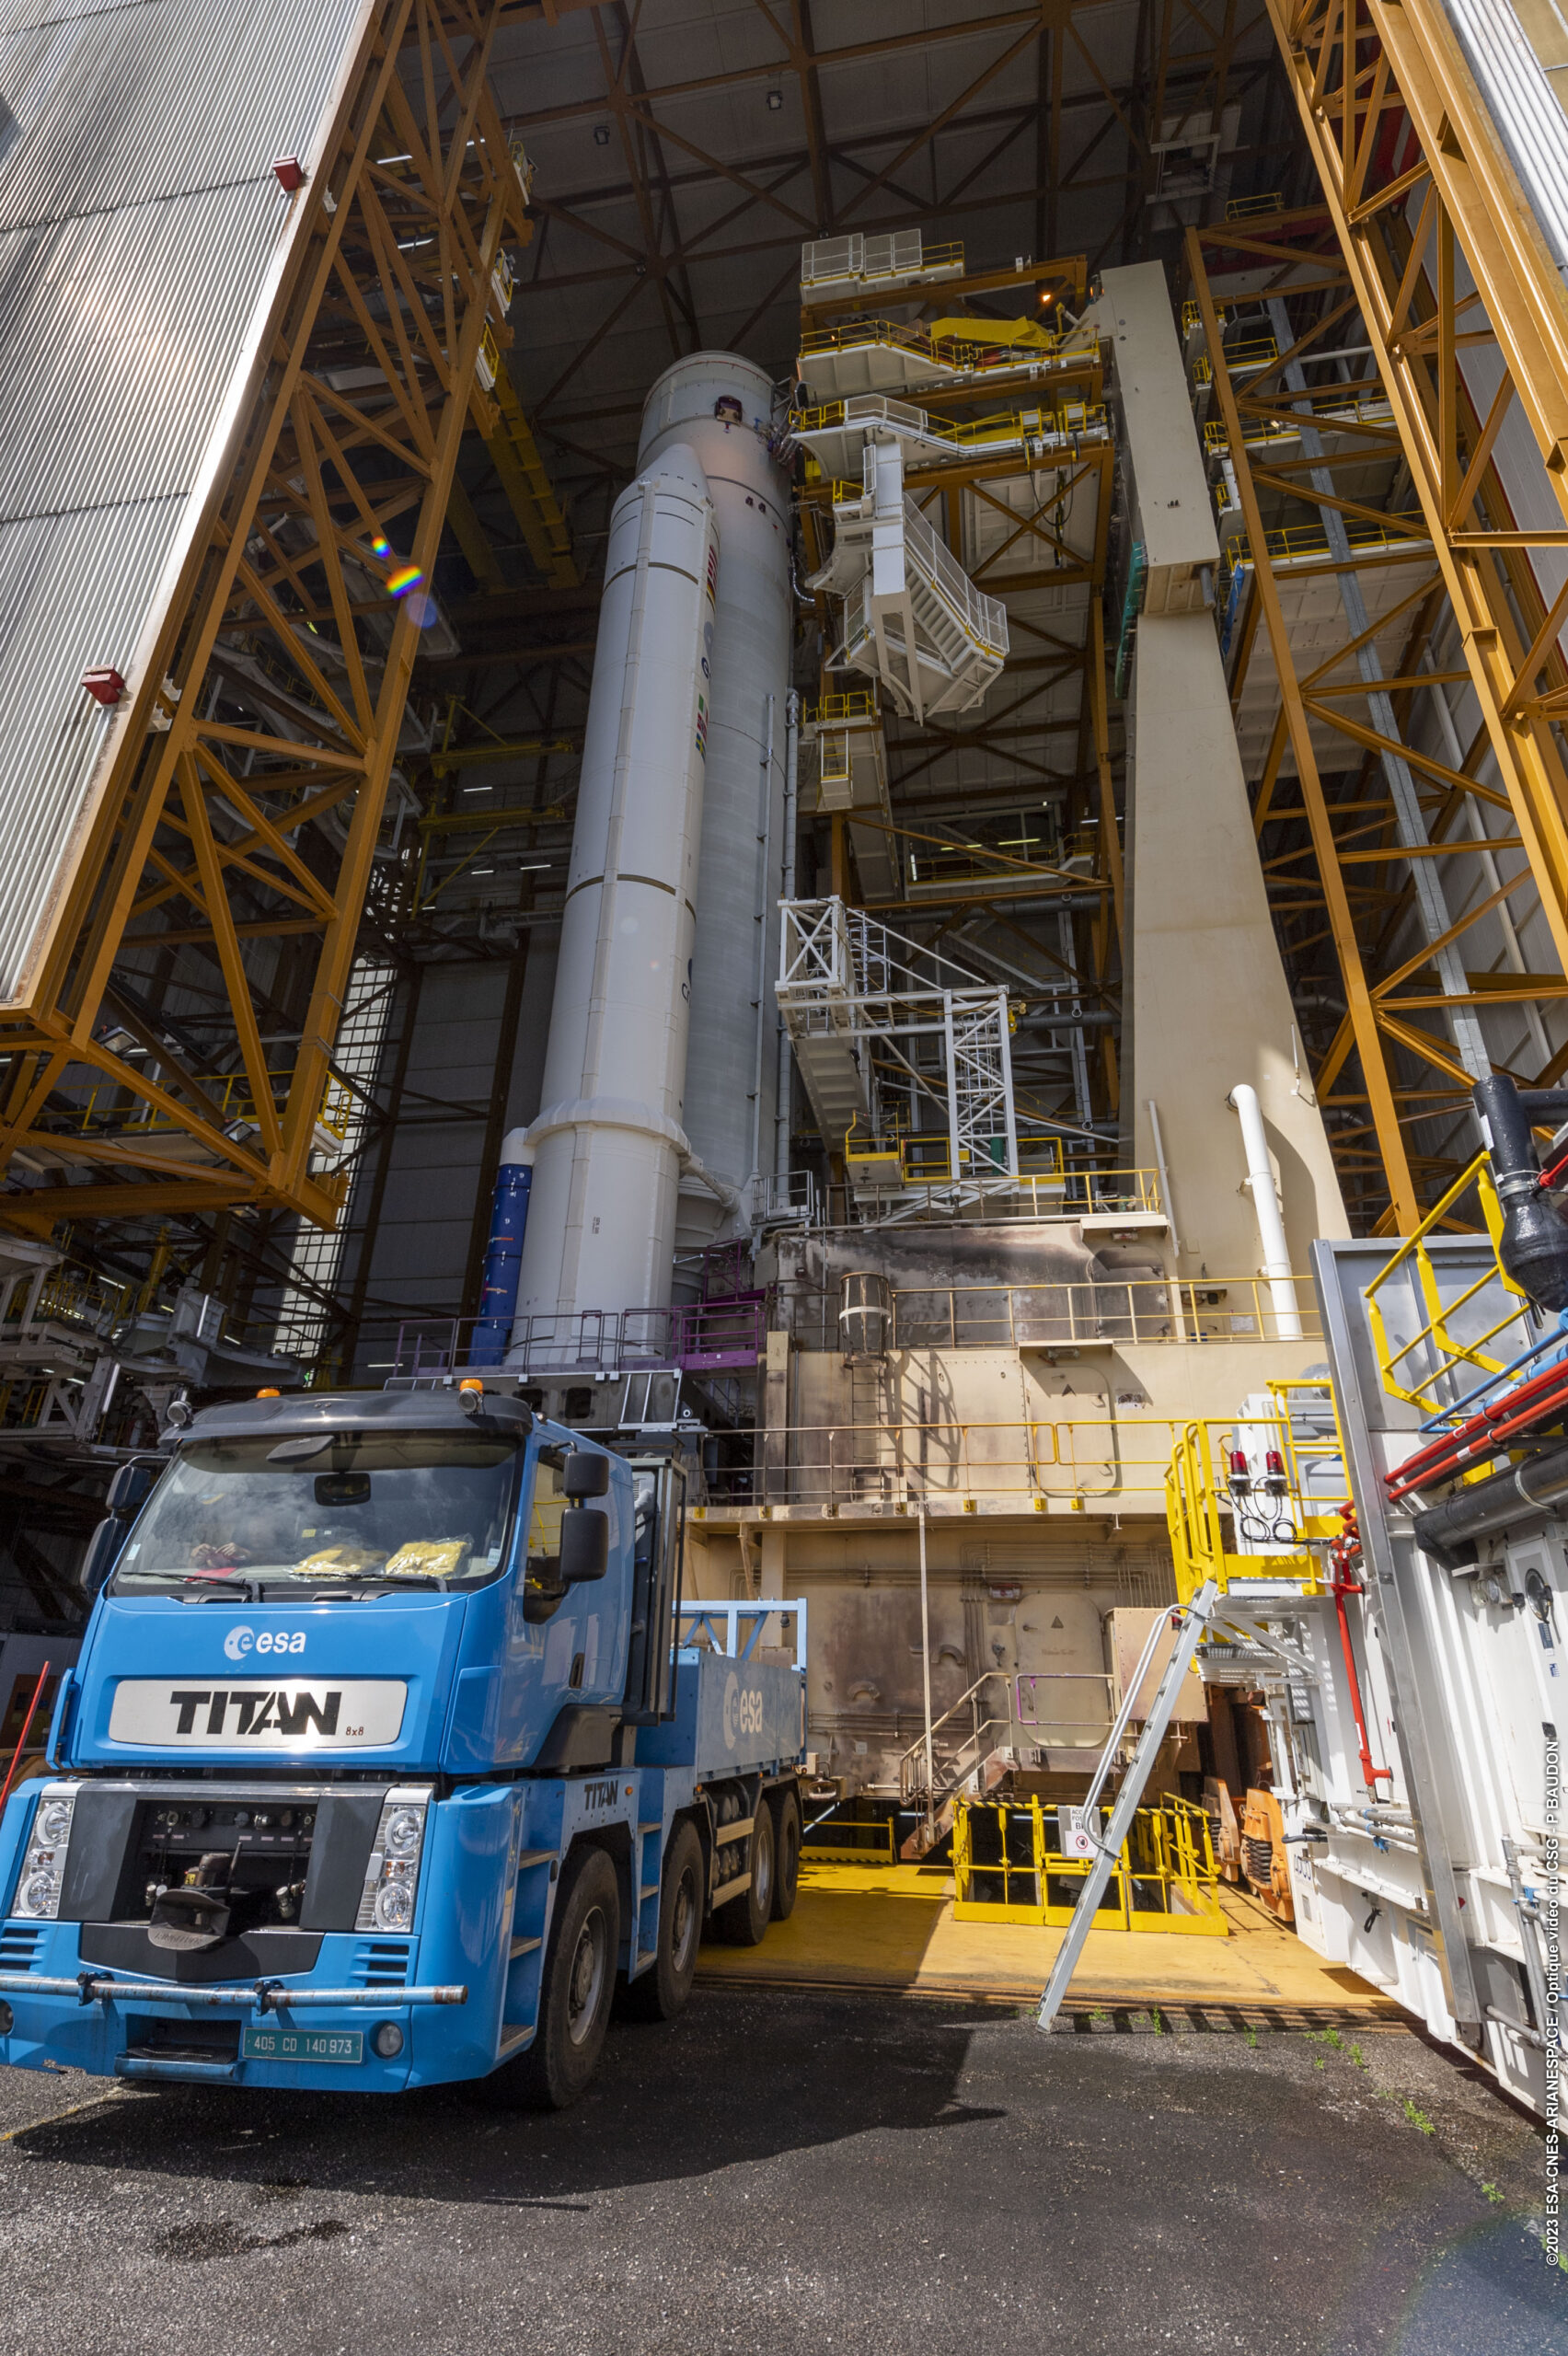 Ariane 5 rocket for the Juice launch being transferred to final assembly scaled